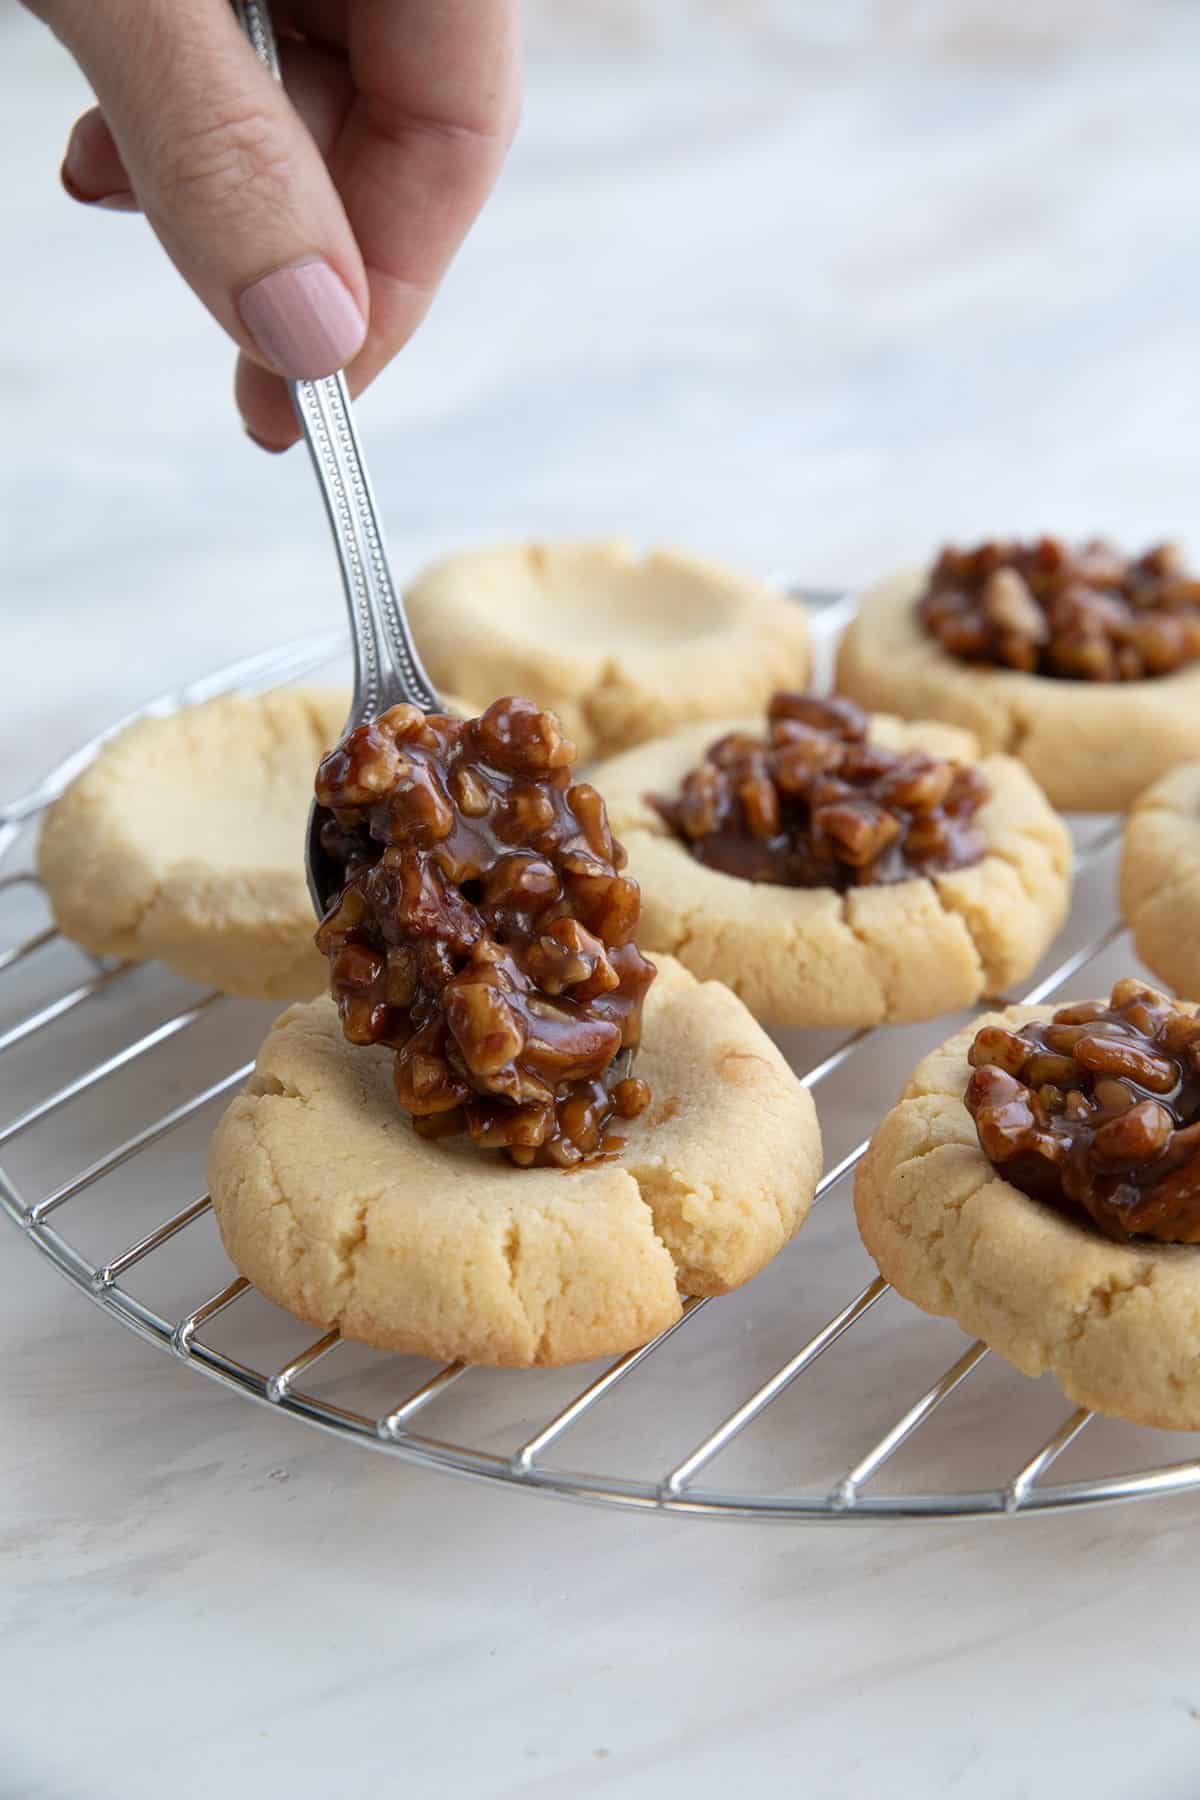 A hand spooning keto pecan pie filling into a thumbprint cookie.